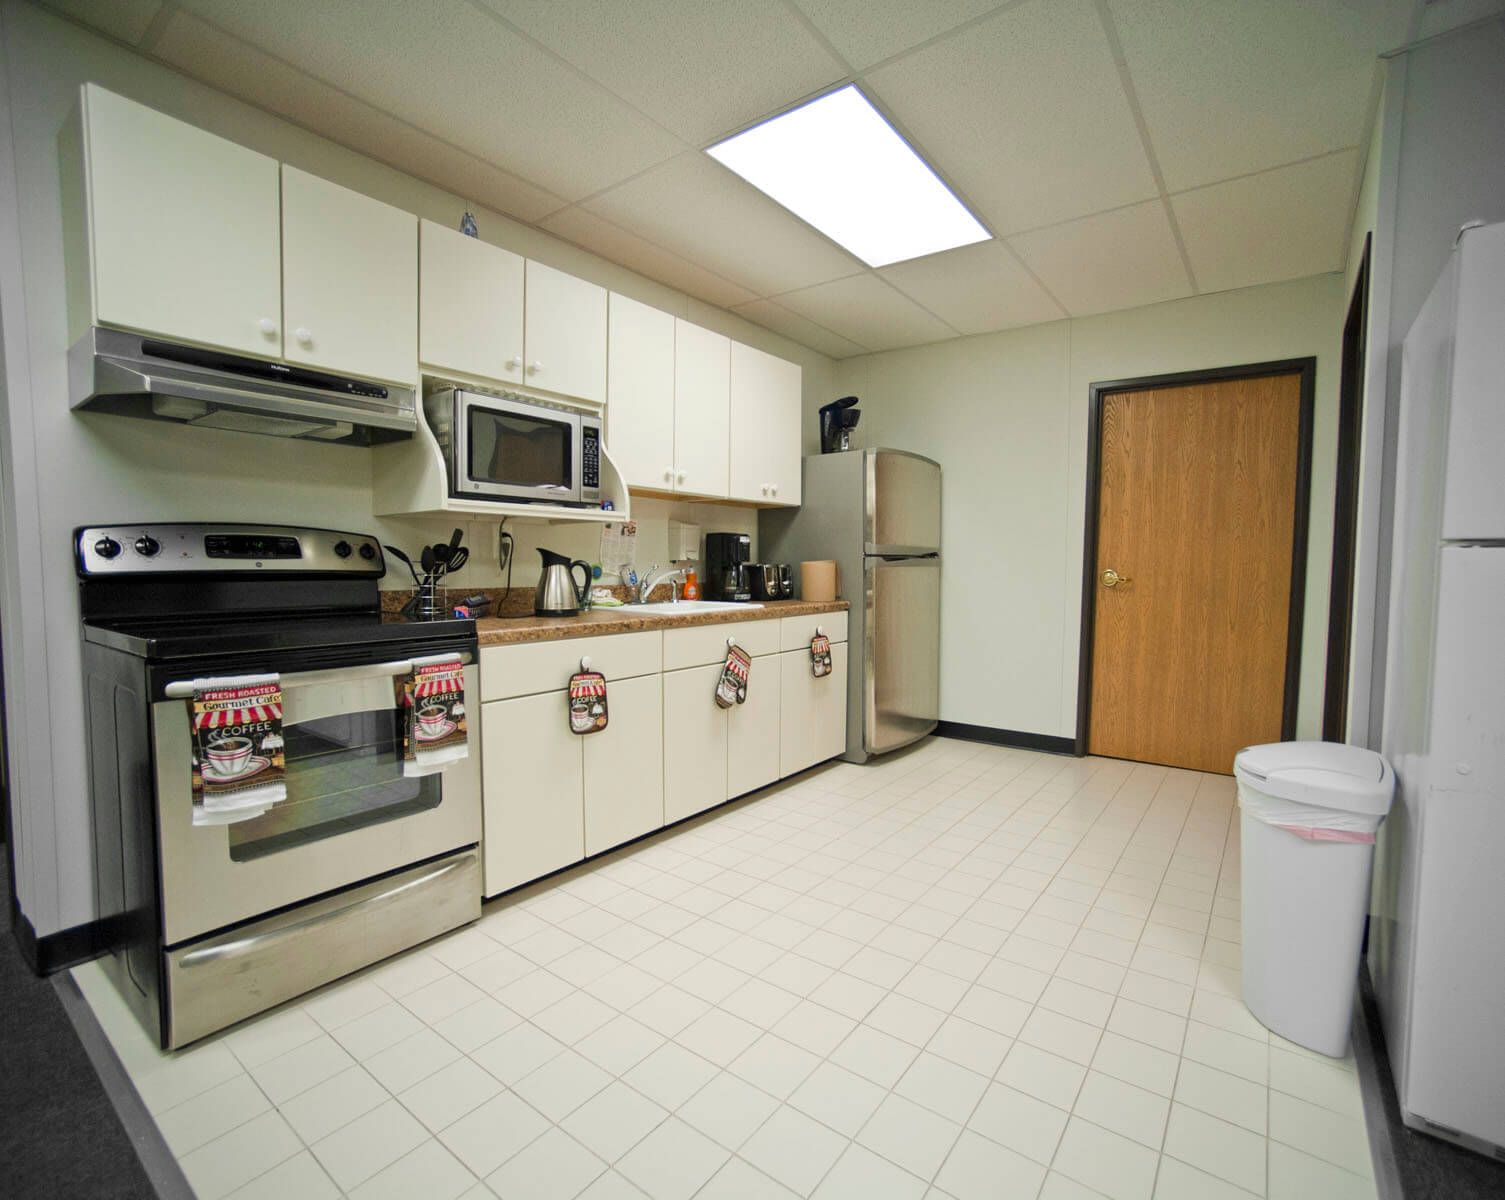 MD-State-Police-Modular-Communications-Building-Kitchen